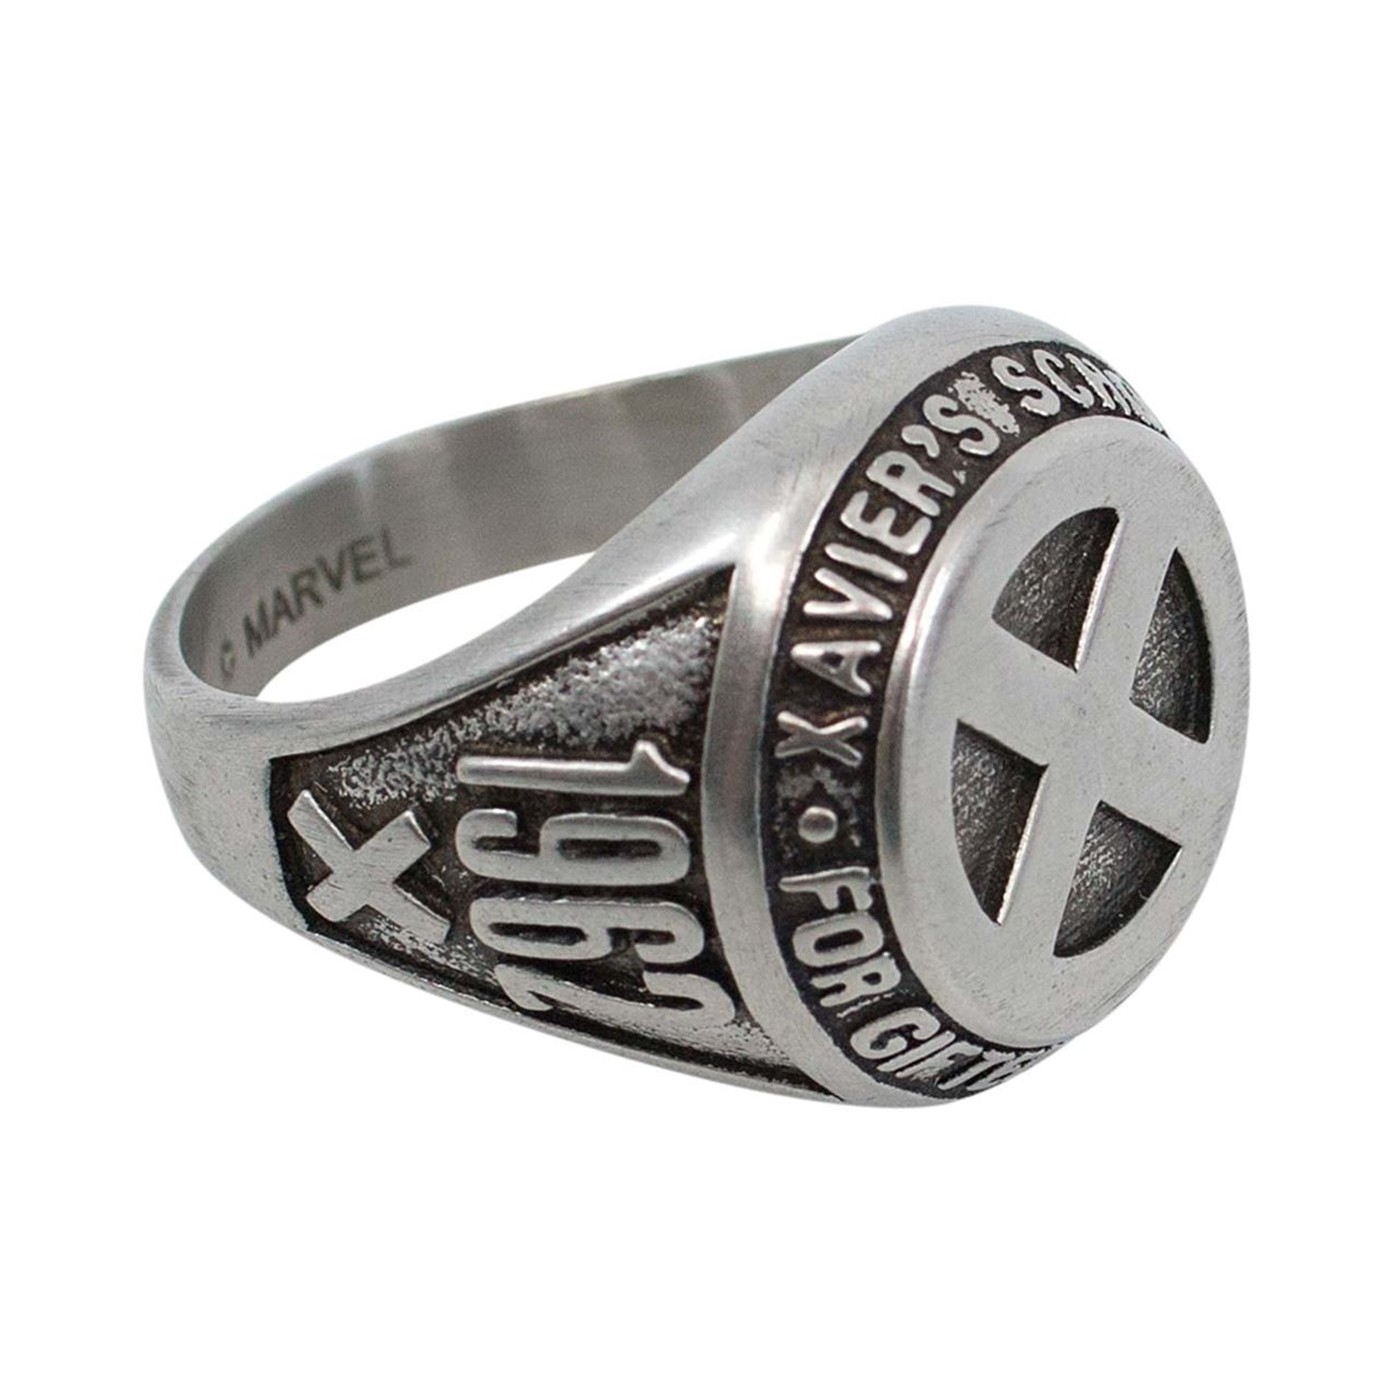 X-Men Xavier School for Gifted Youngsters Class Ring